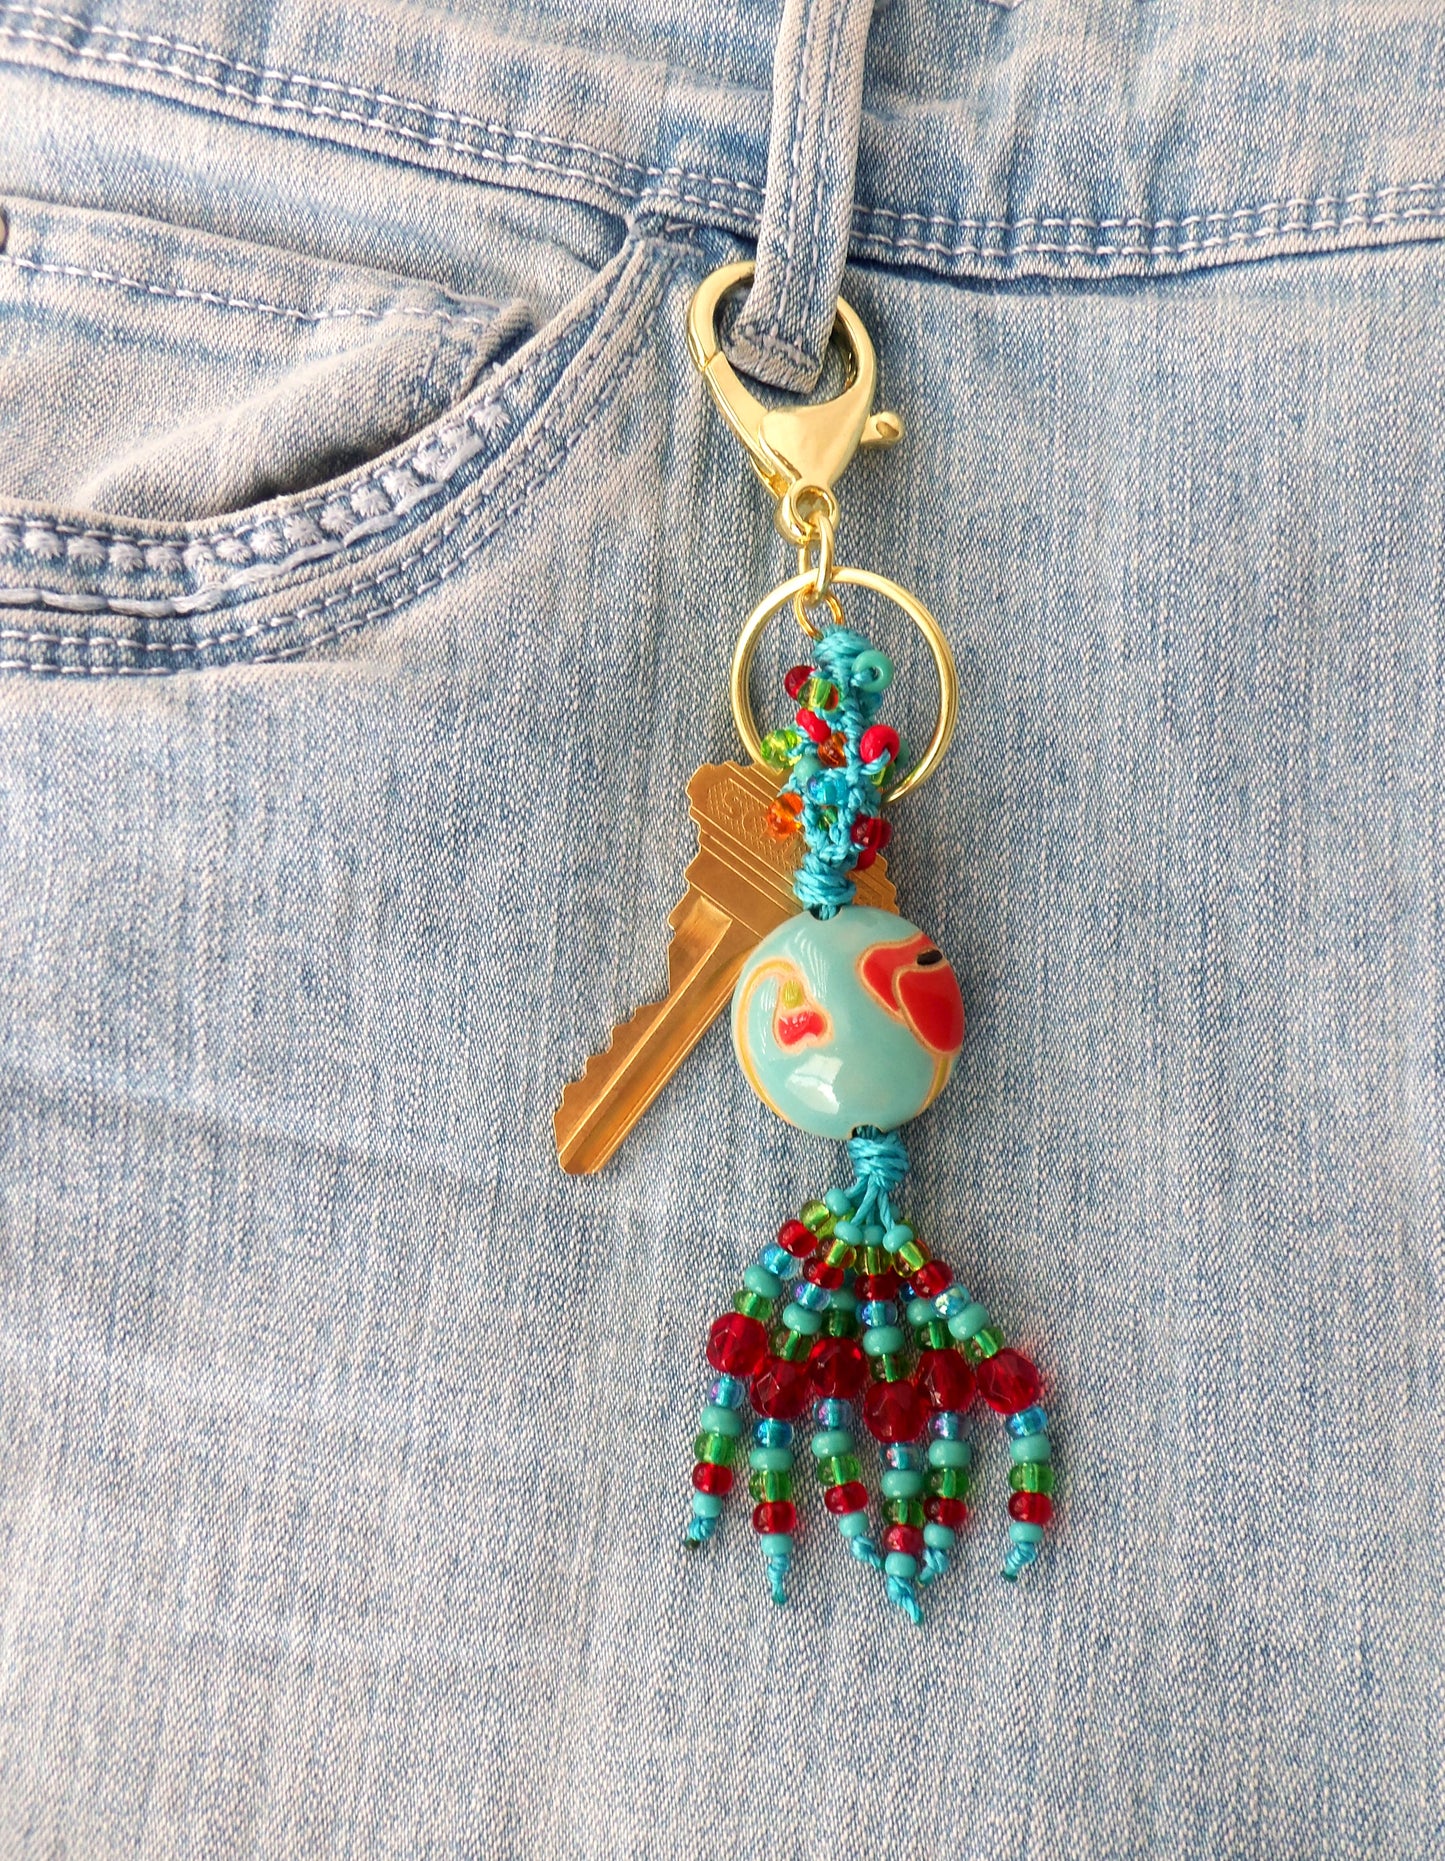 Red Flower Beaded Clip-On Keychain - Juicybeads Jewelry